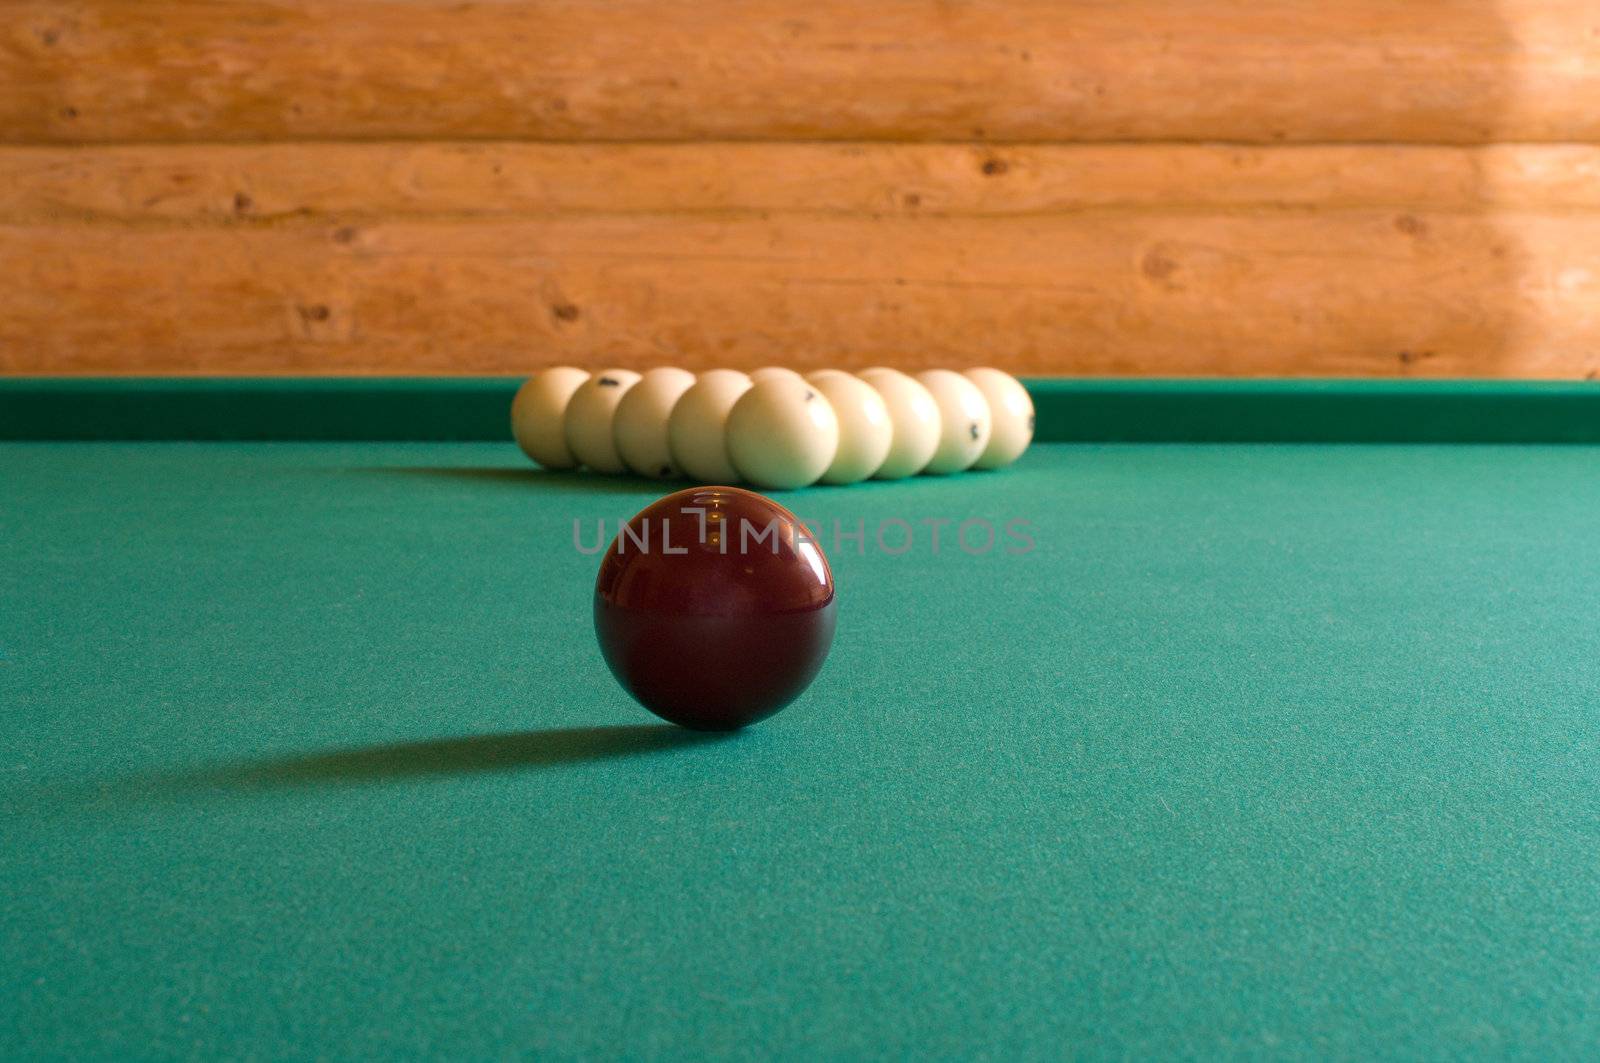 Balls for Russian billiards on a table with green baize.